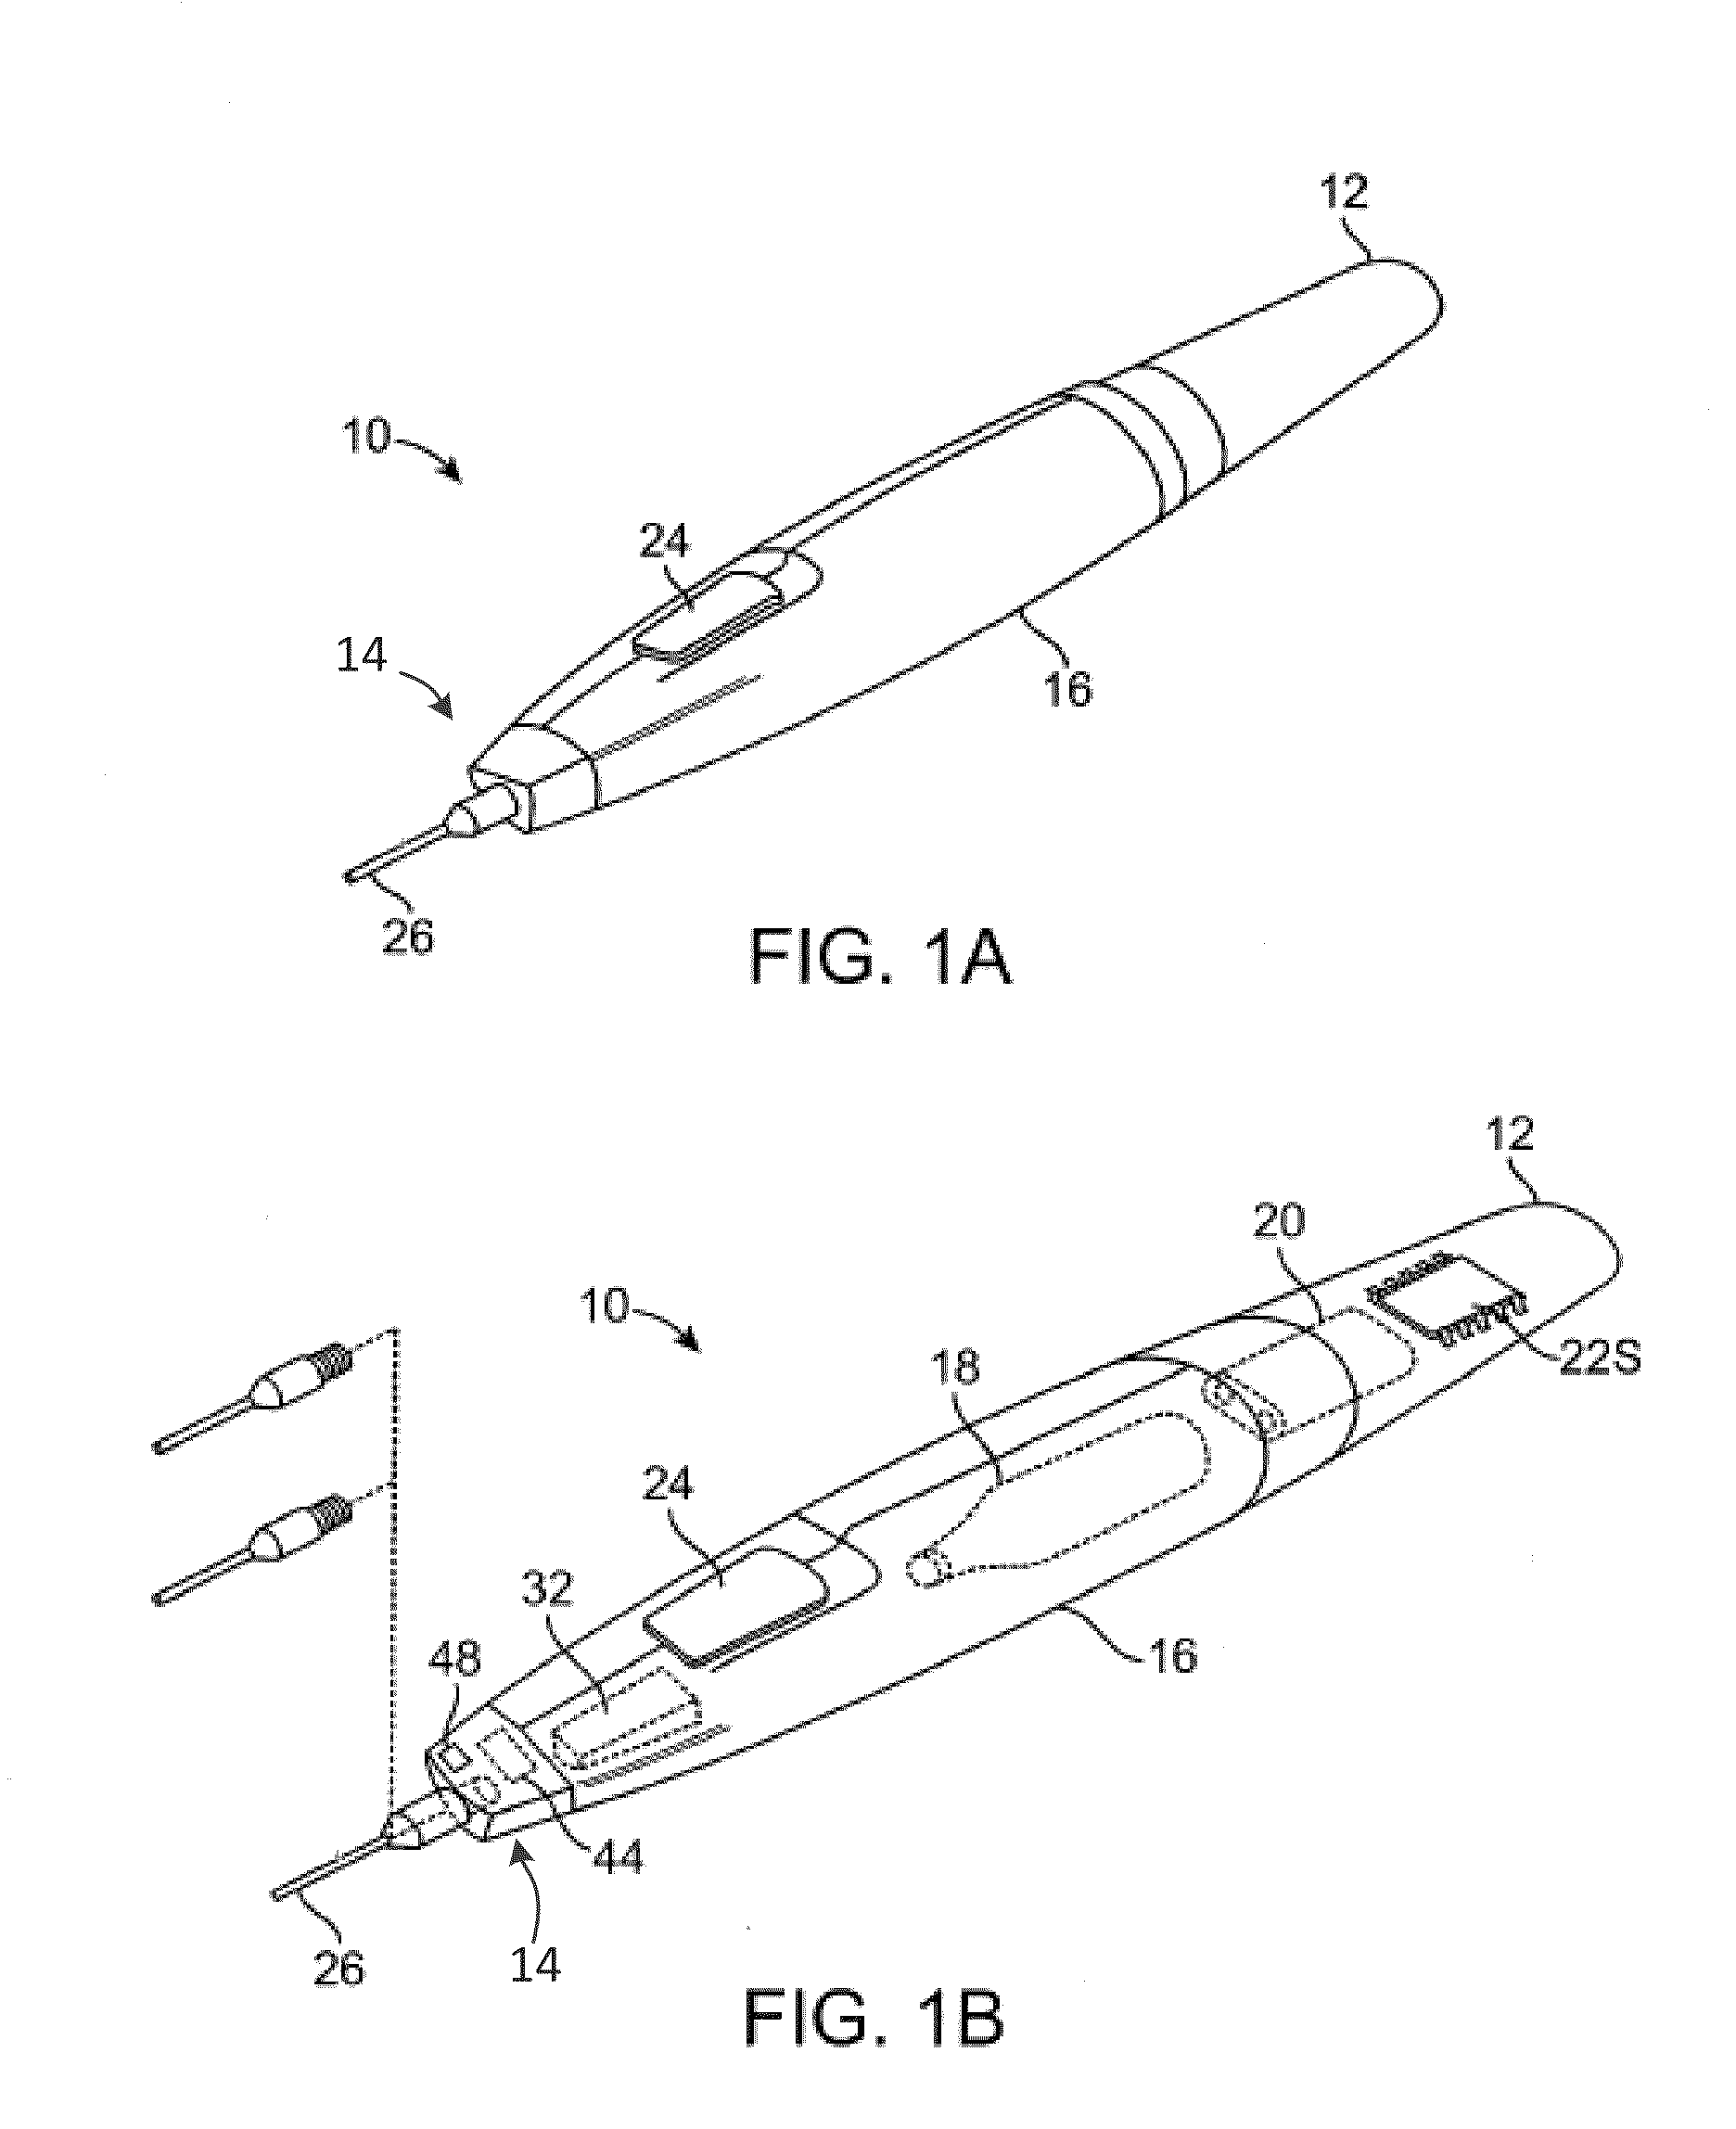 Methods, Systems, and Devices for Treating Neuromas, Fibromas, Nerve Entrapment, and/or Pain Associated Therewith